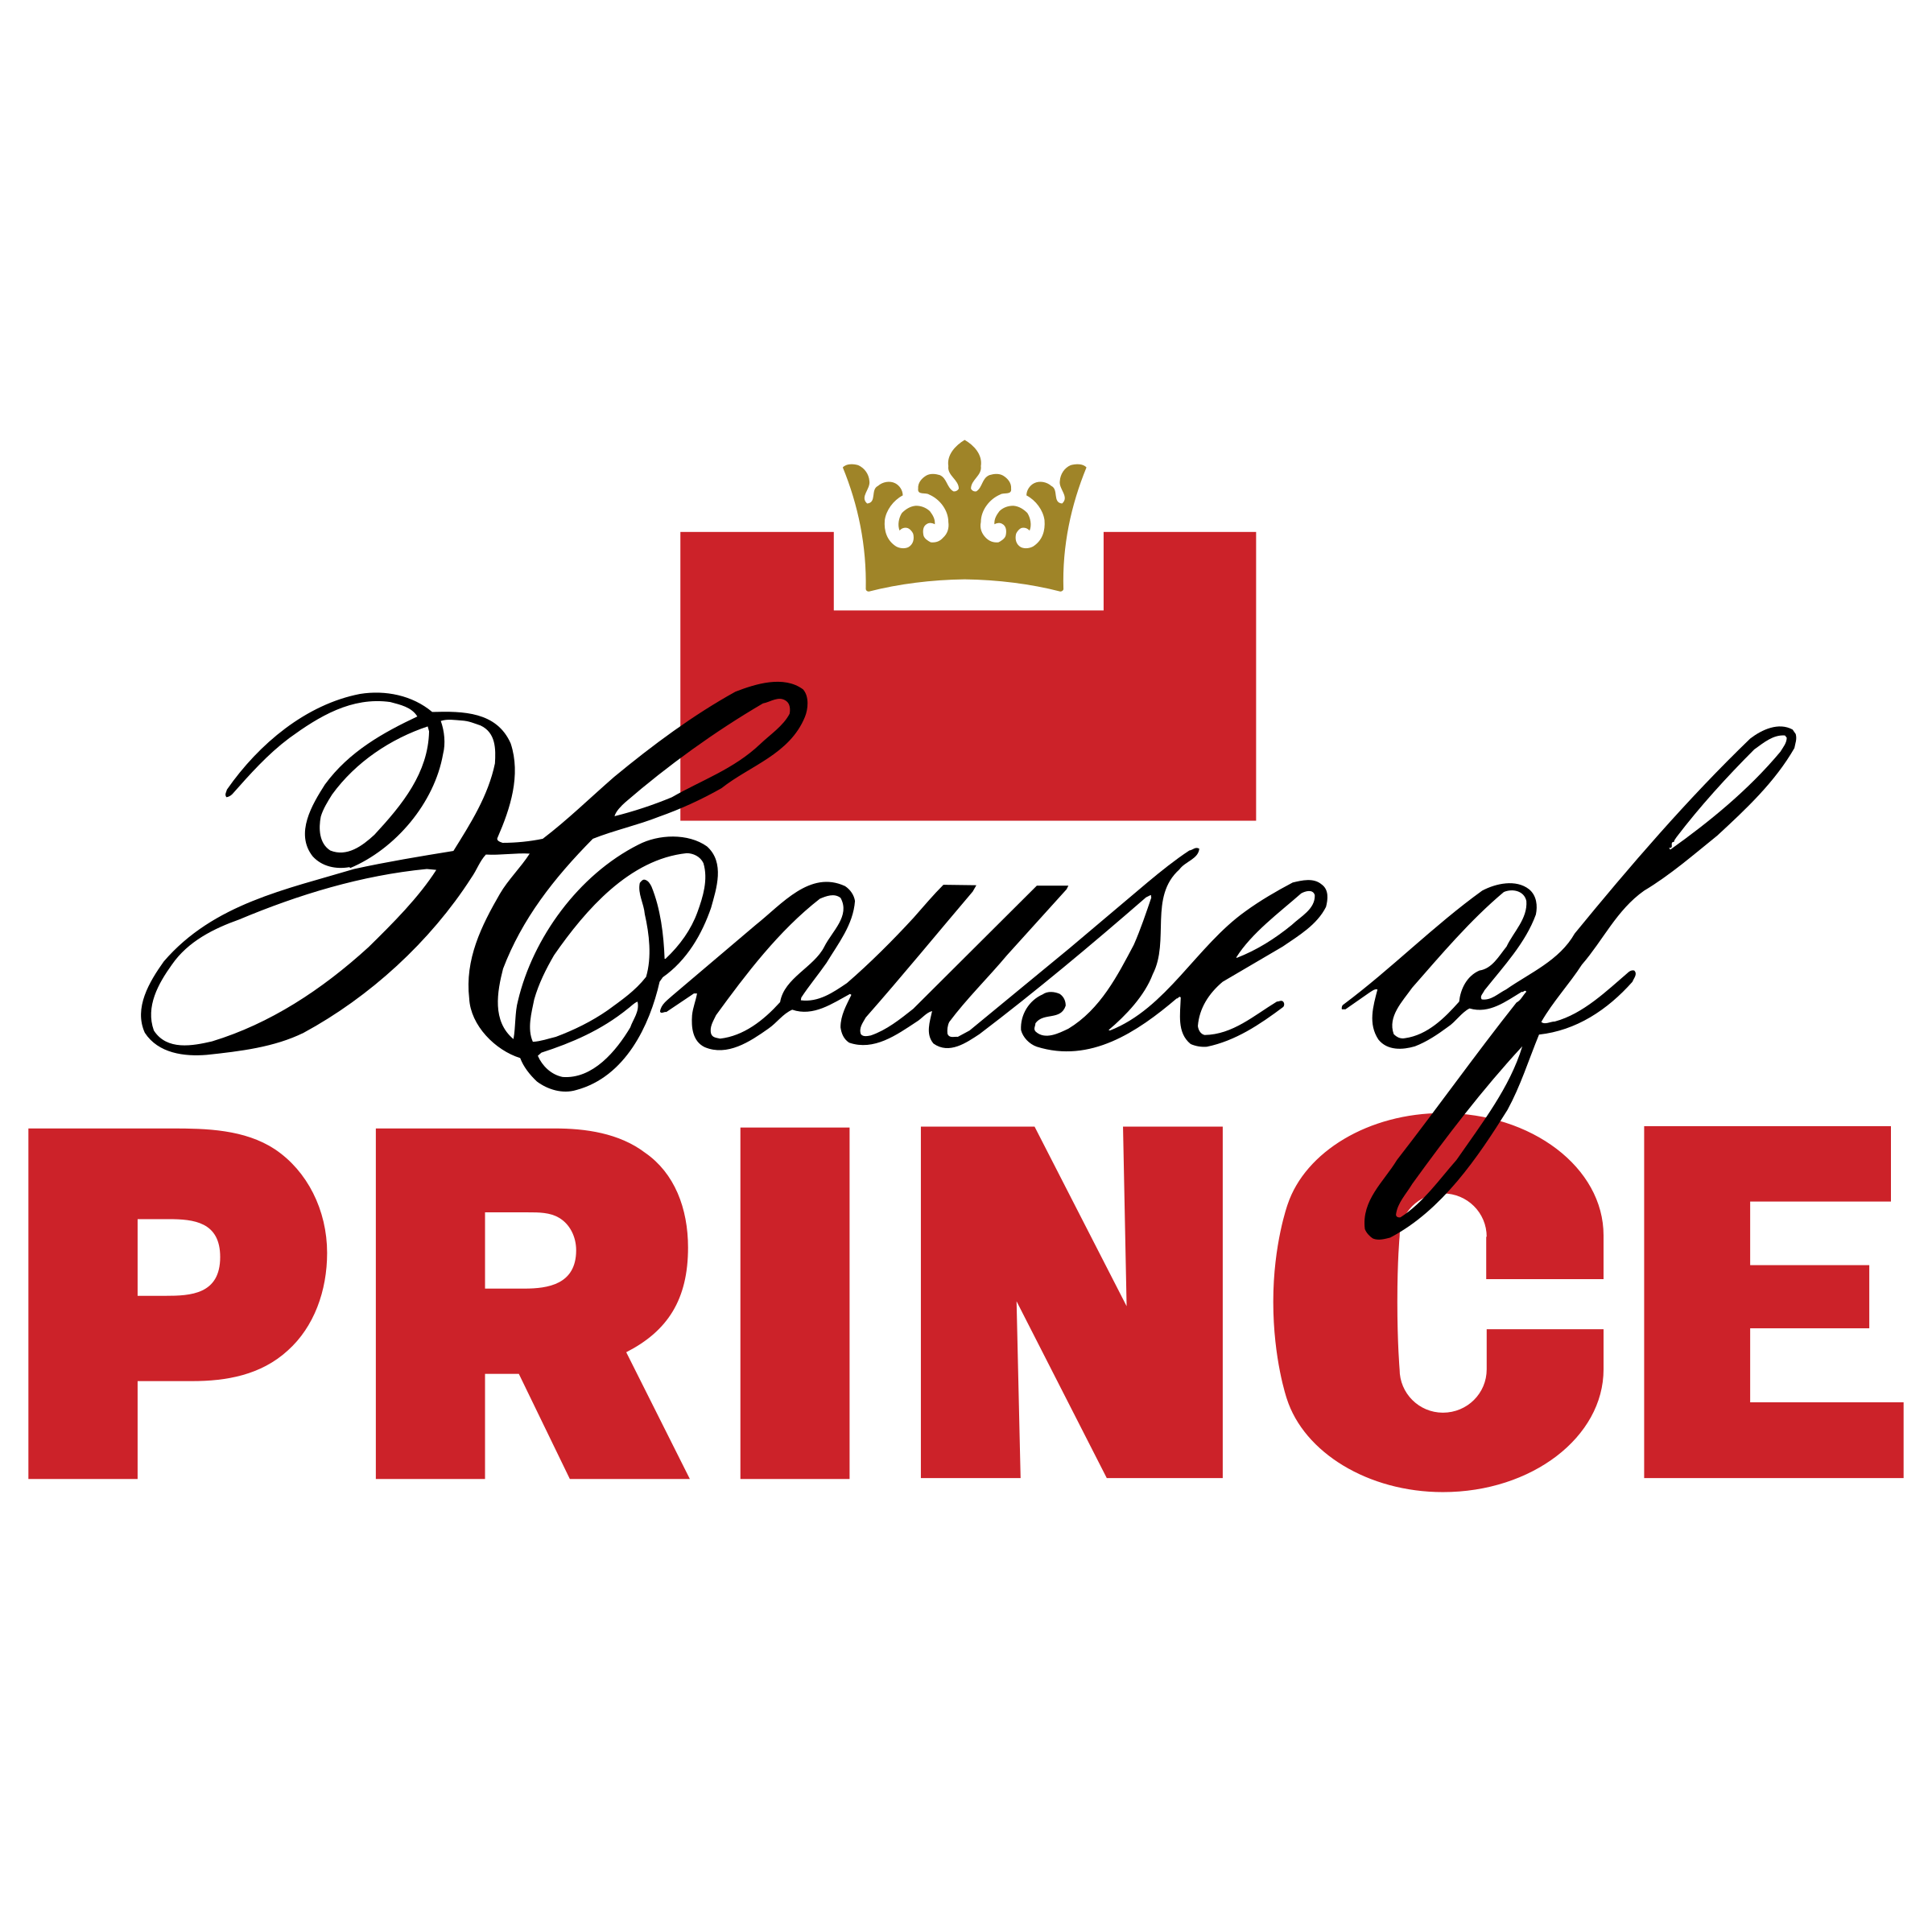 Download Prince Logo Vector at Vectorified.com | Collection of ...